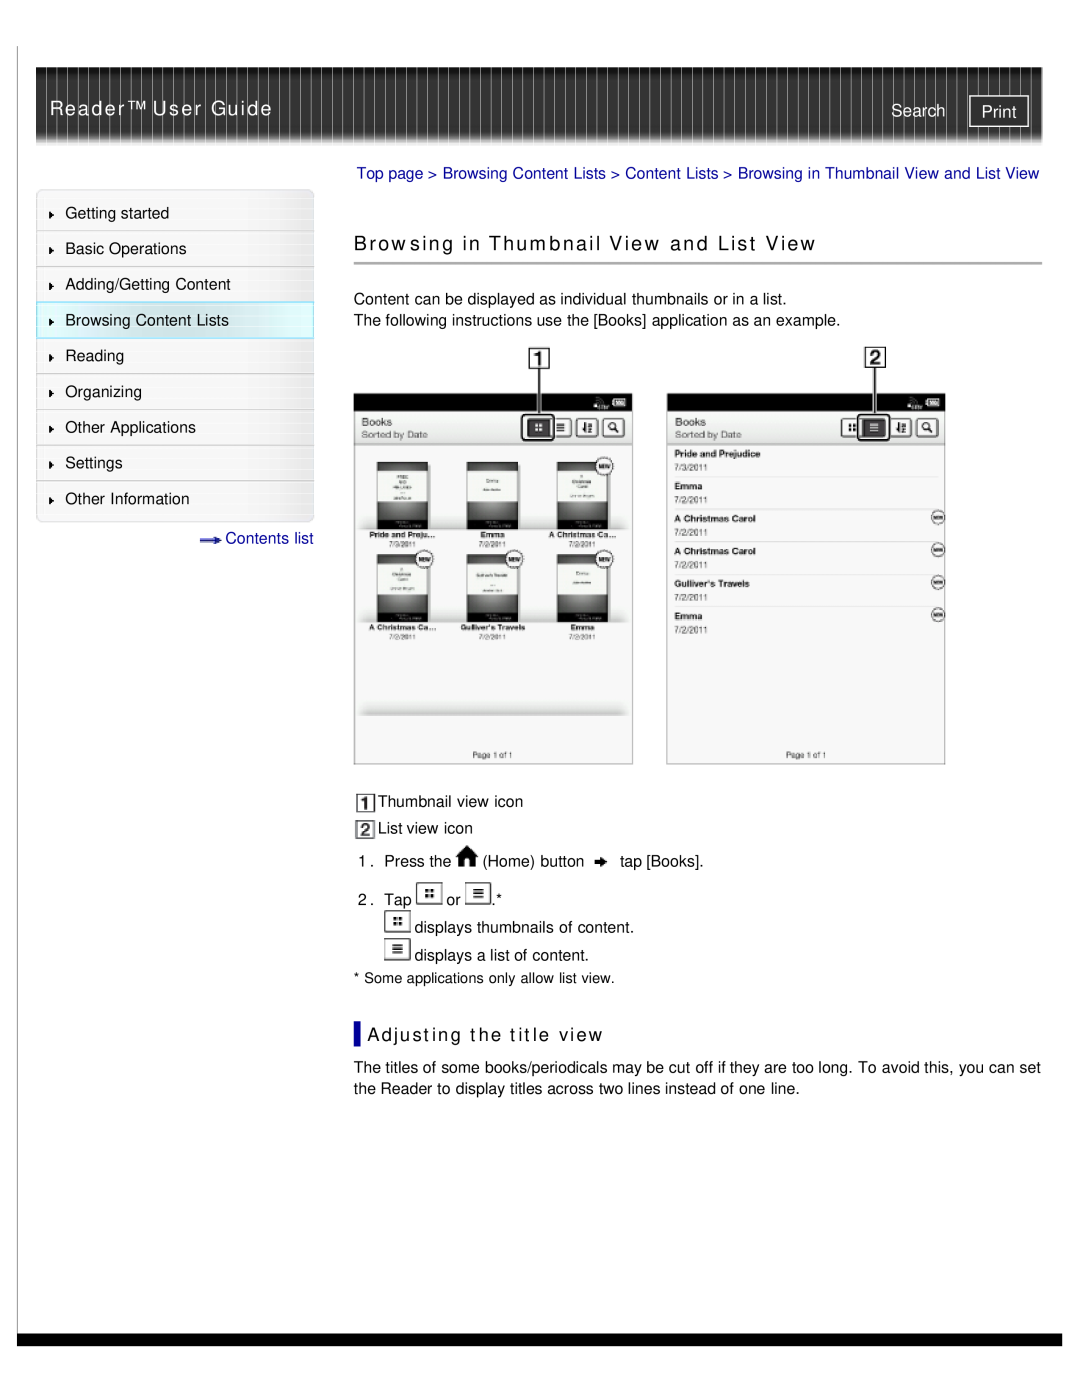 Sony PRS-T1RC Browsing in Thumbnail View and List View, Adjusting the title view, Reader User Guide, Search, Print 